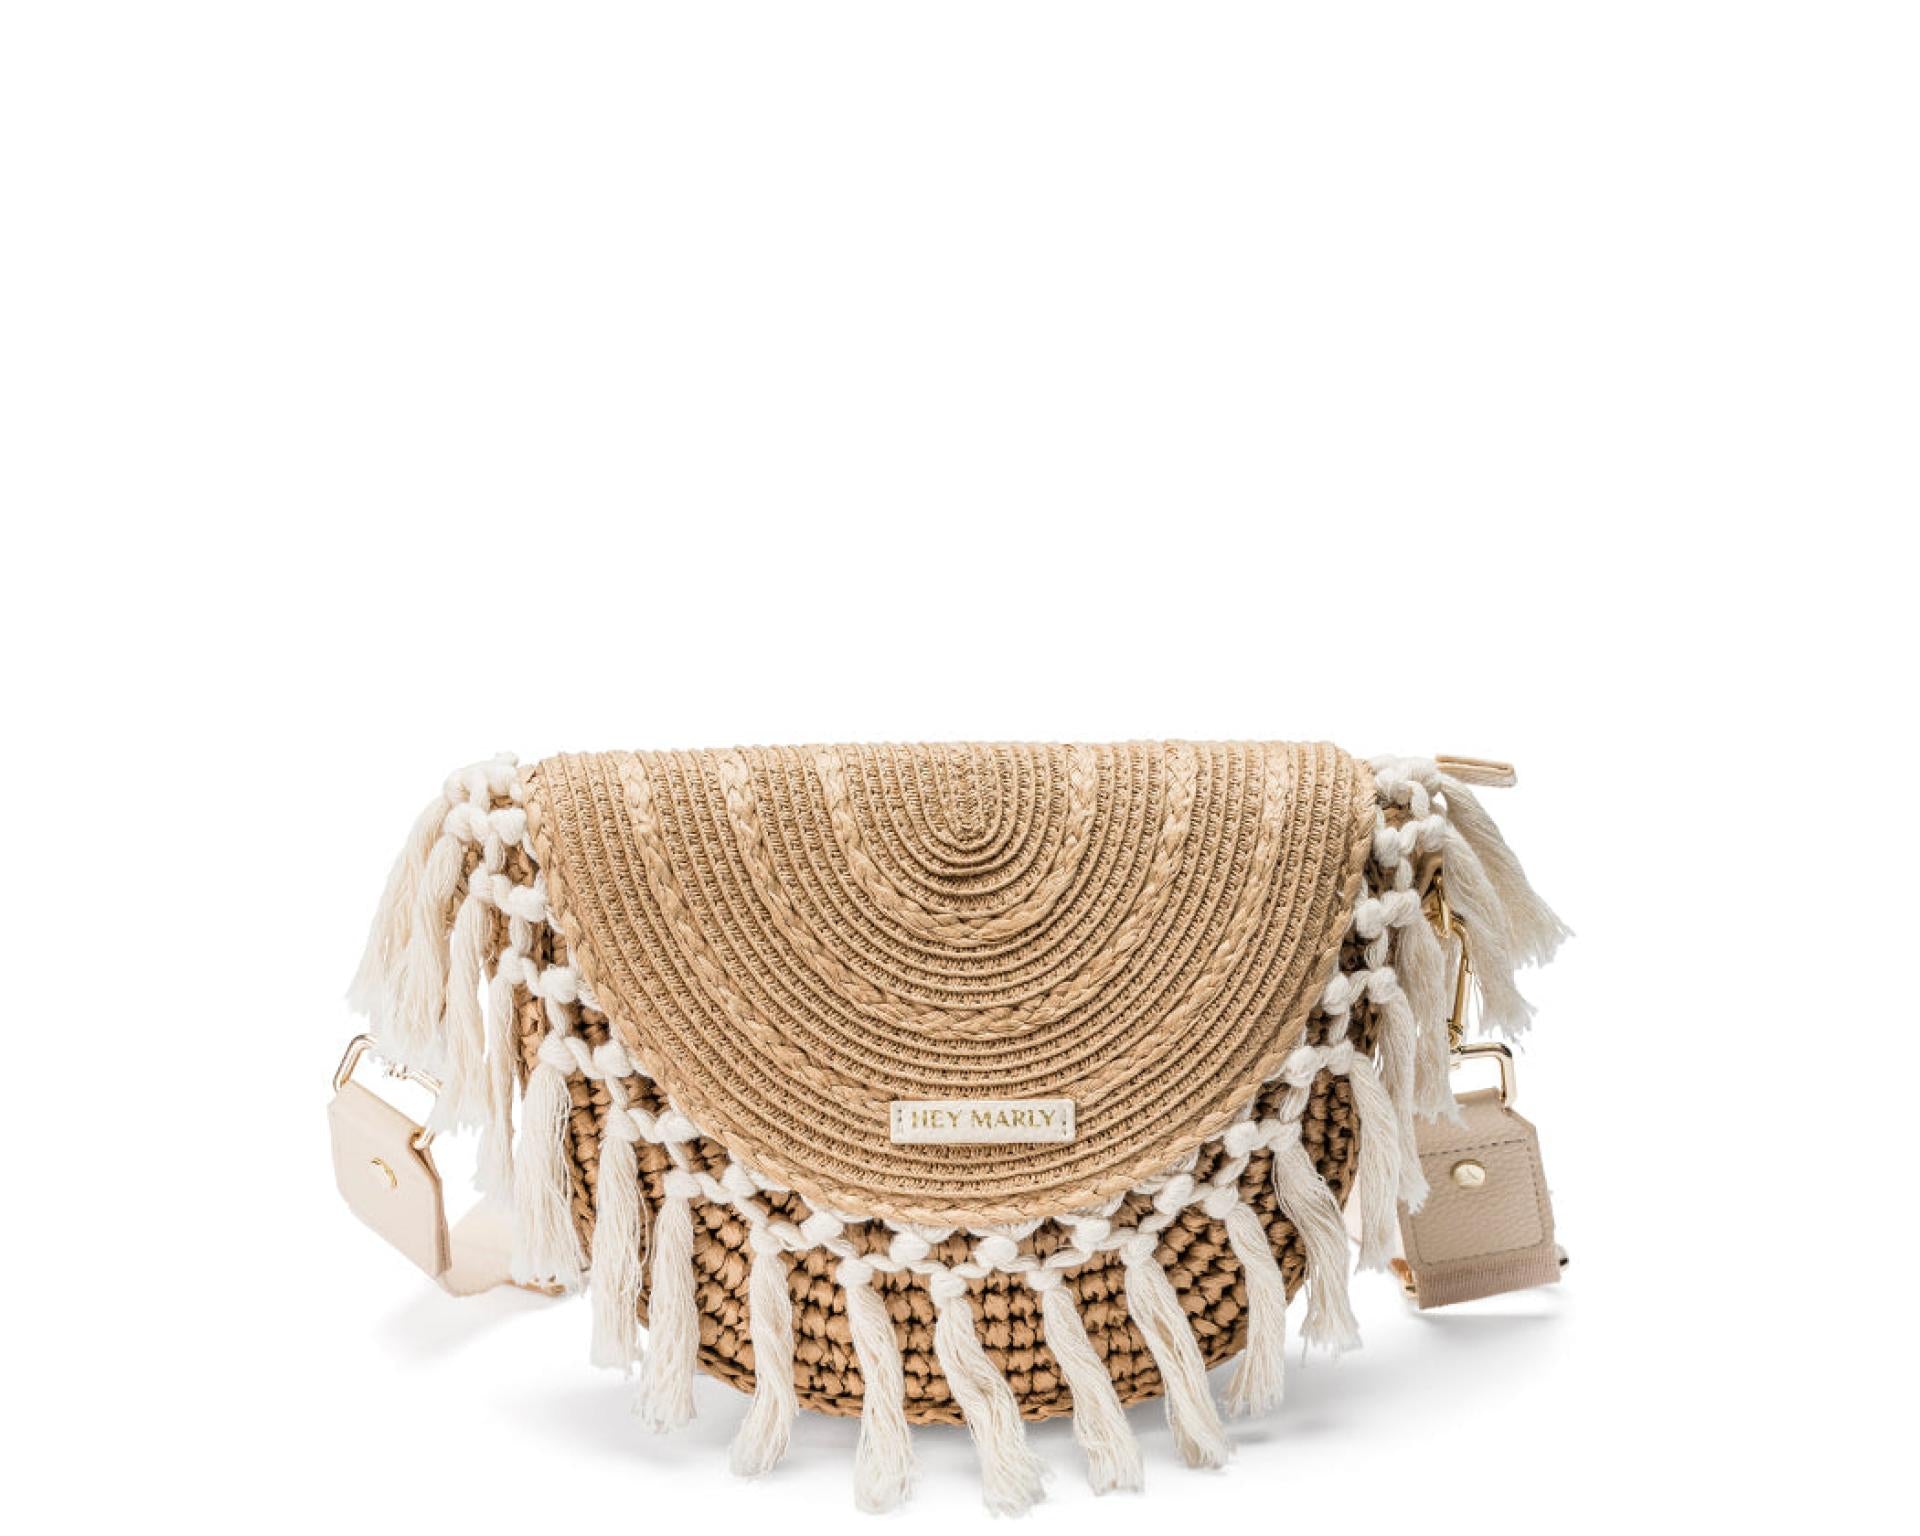 Hey Marly Handtasche Soul Sister - Variante: Straw Crema